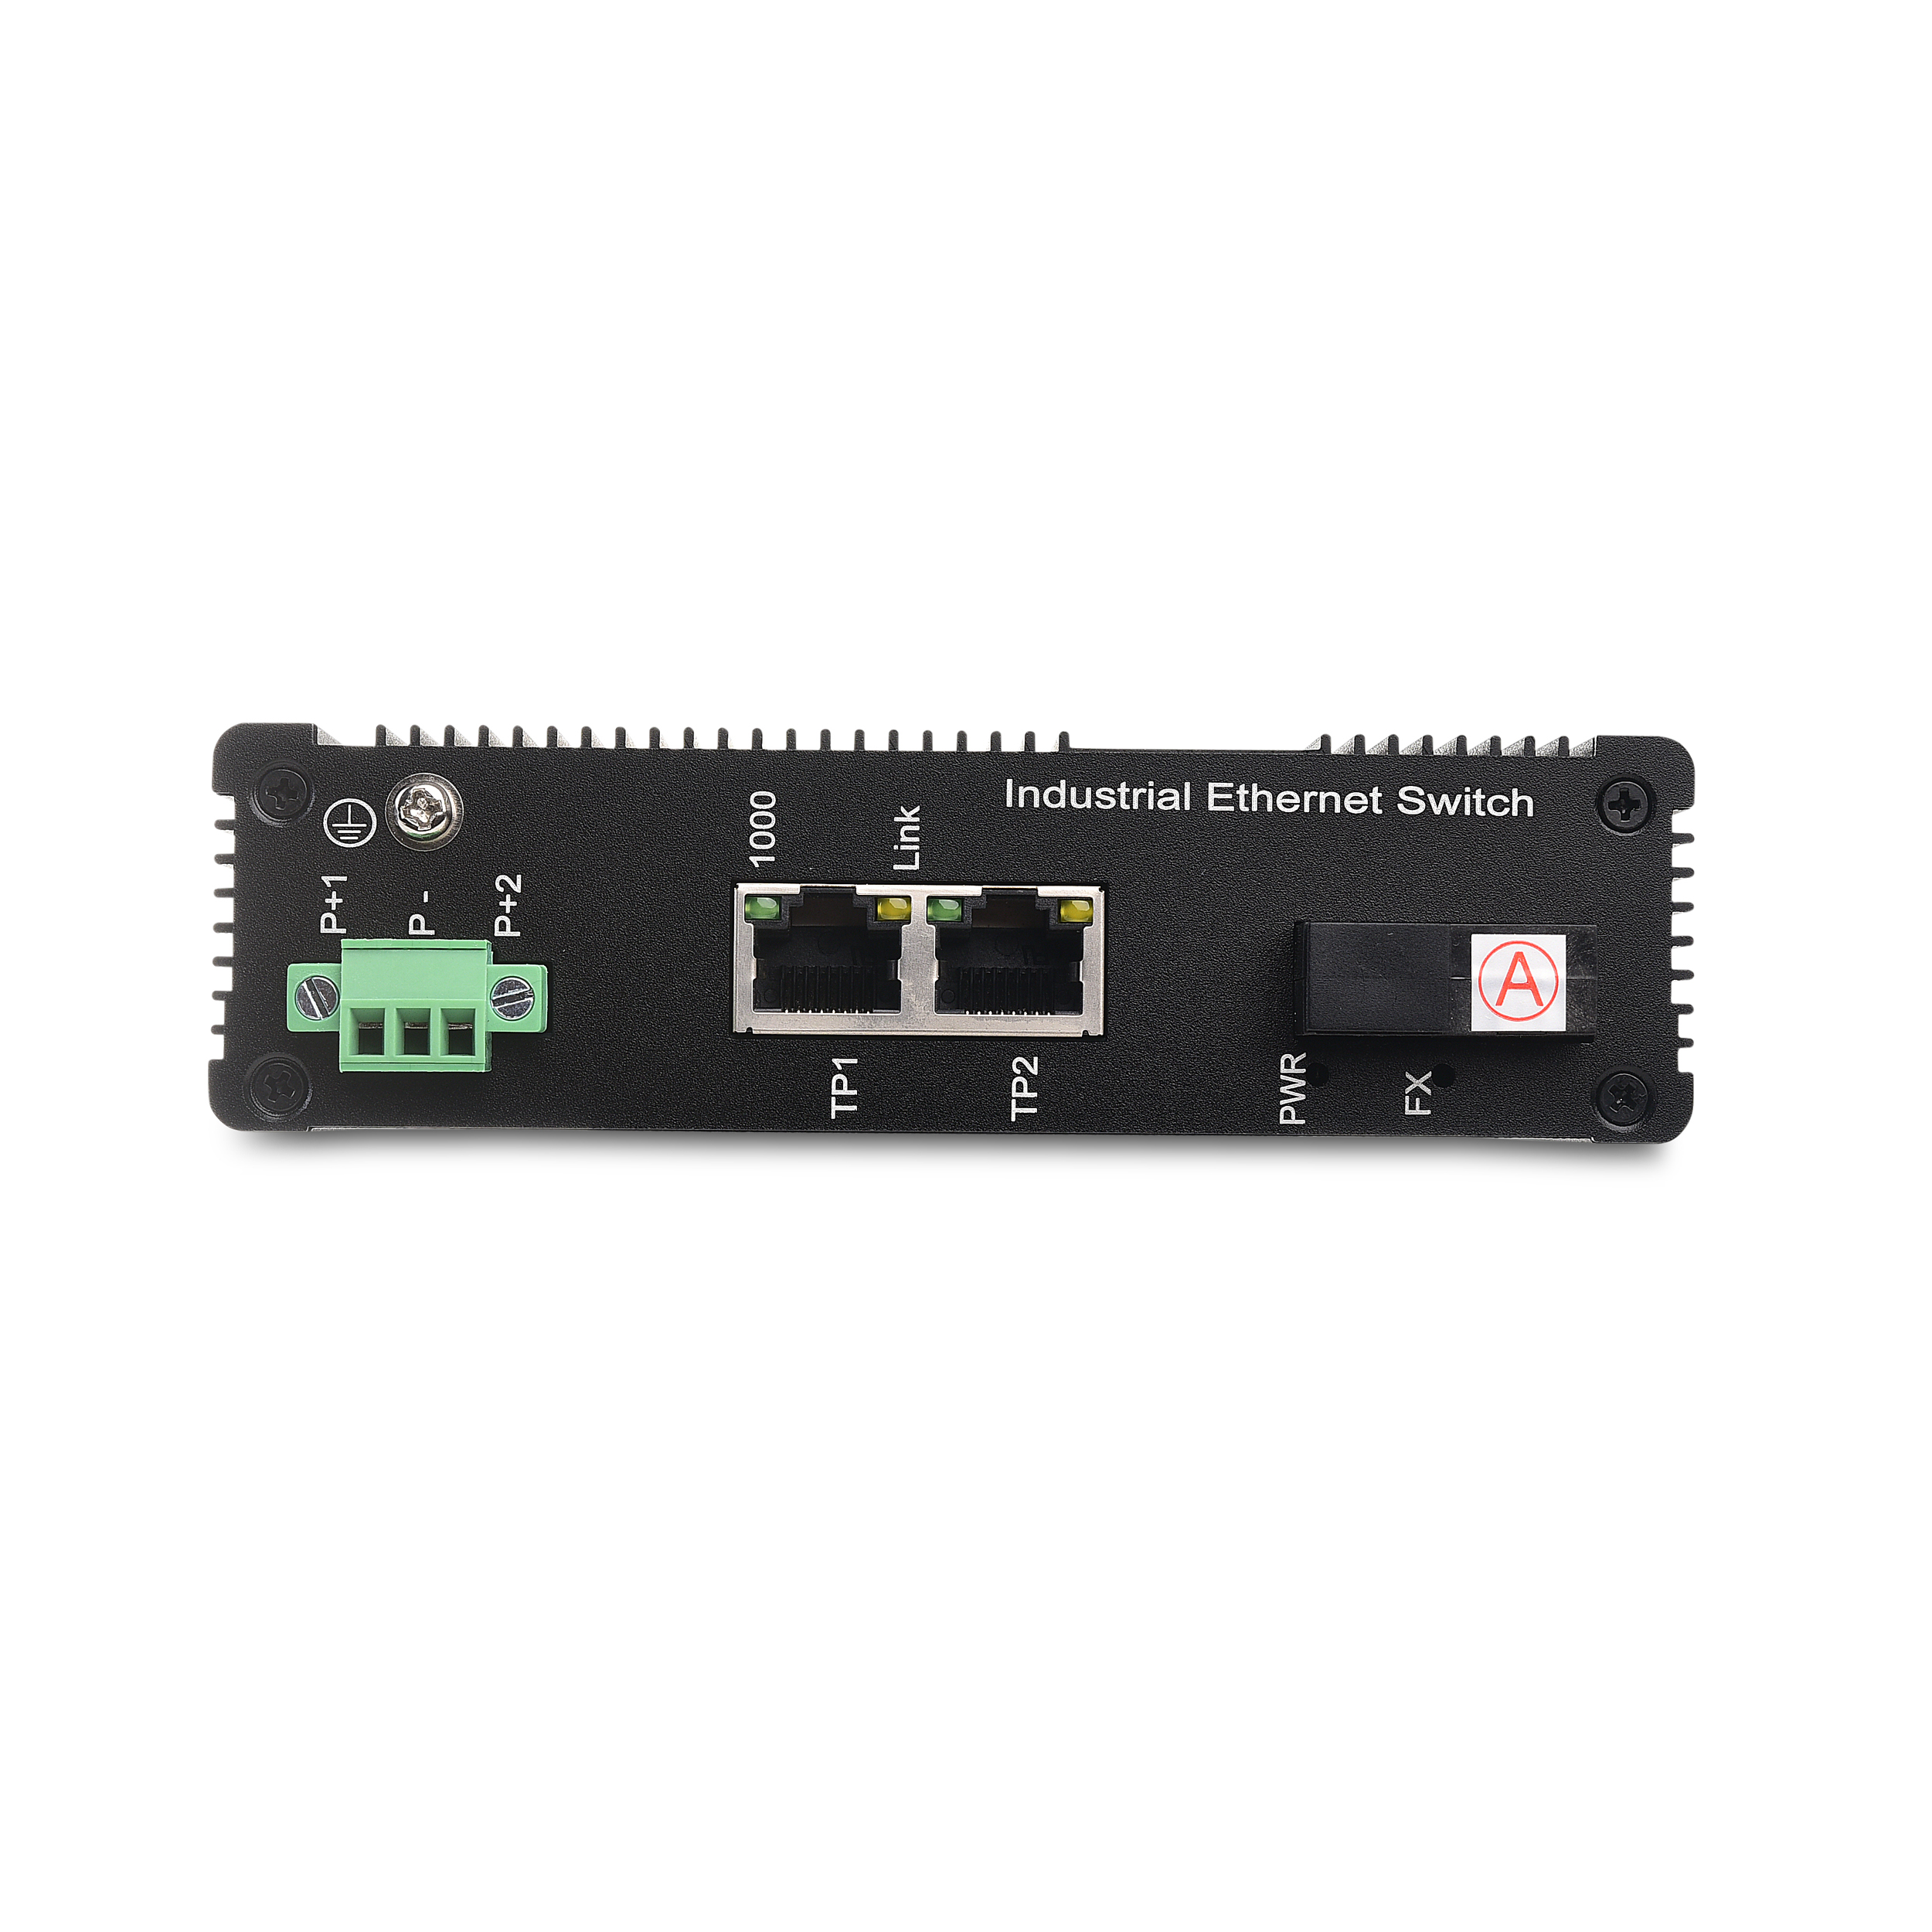 China Wholesale Ethernet Port Factory Suppliers - 2 10/100/1000TX and 1 1000FX | Industrial Media Converter JHA-IG12H – JHA